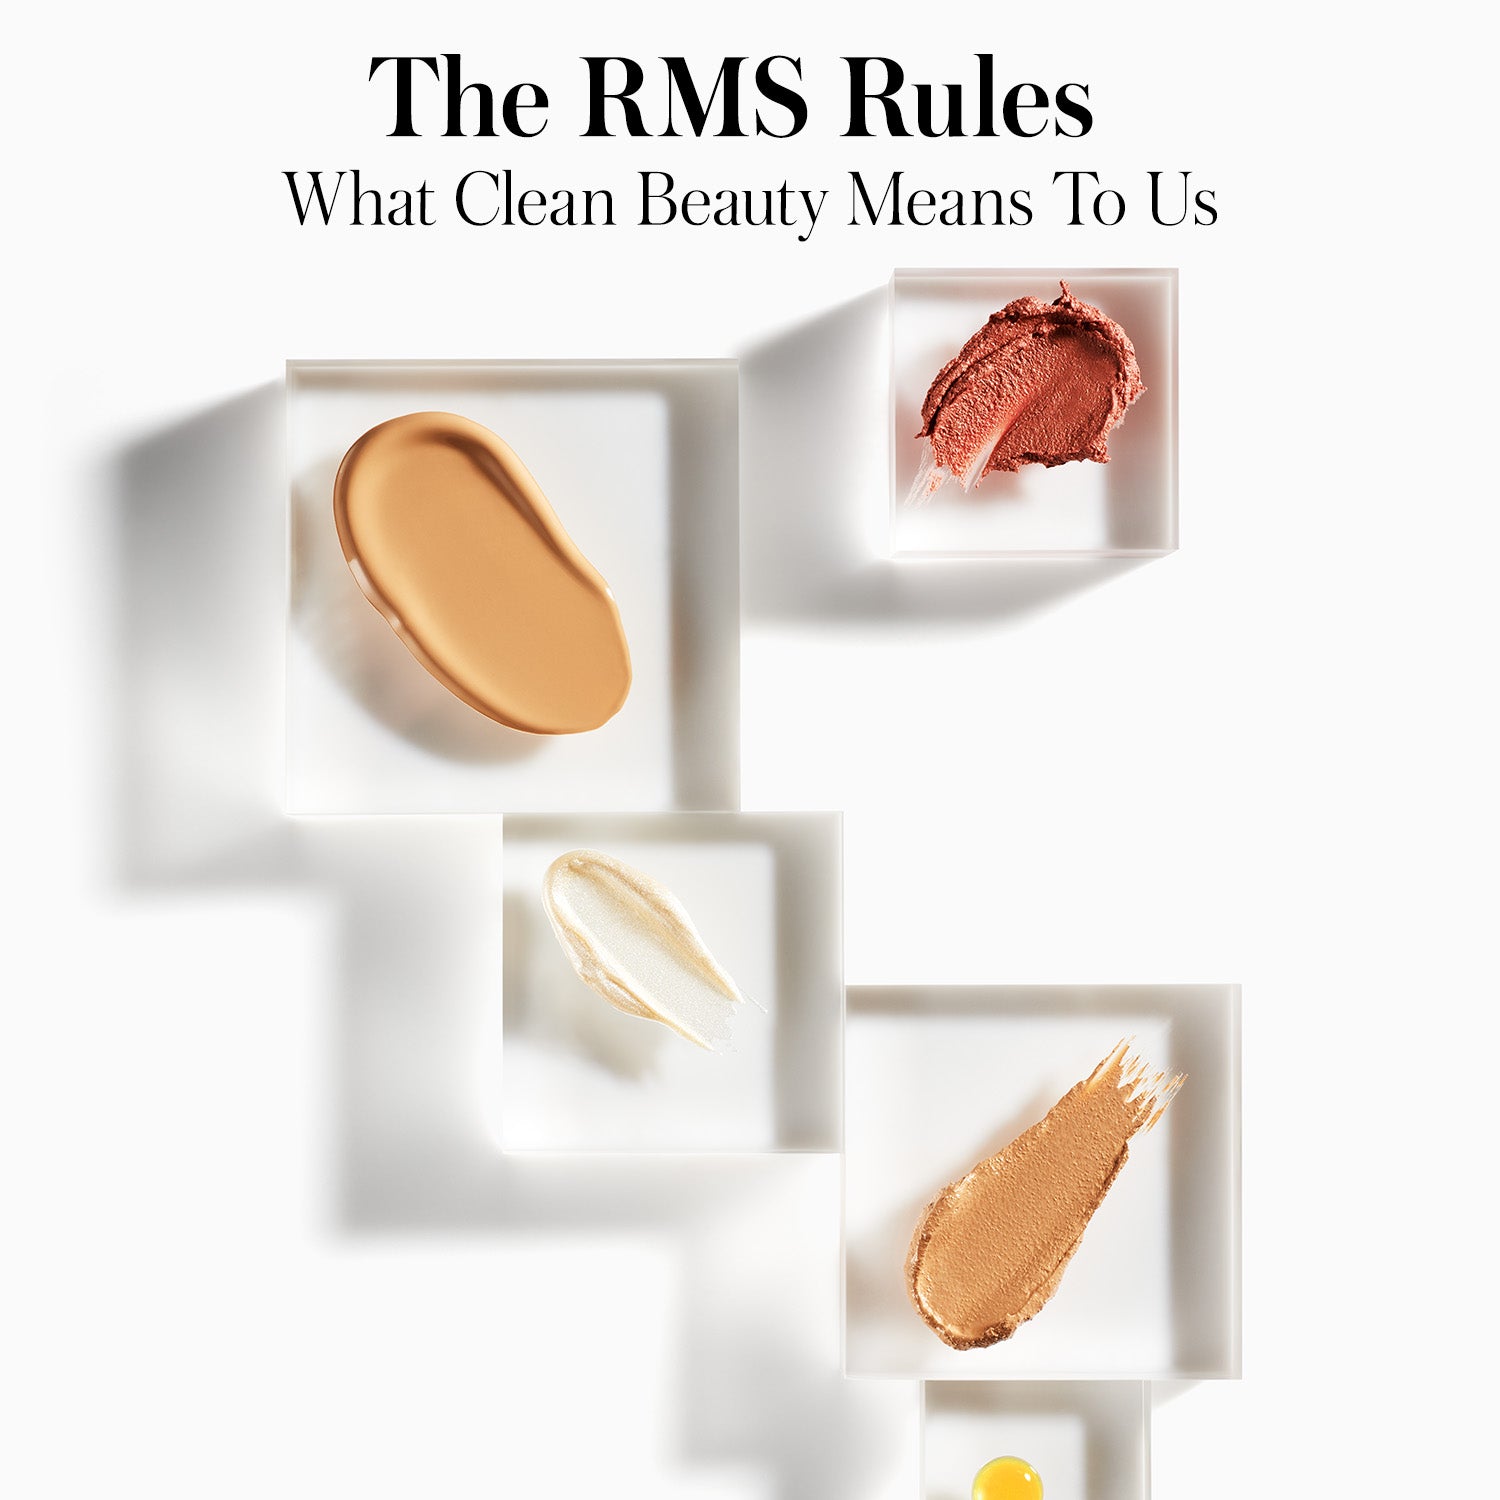 The RMS Rules: What Clean Beauty Means To Us